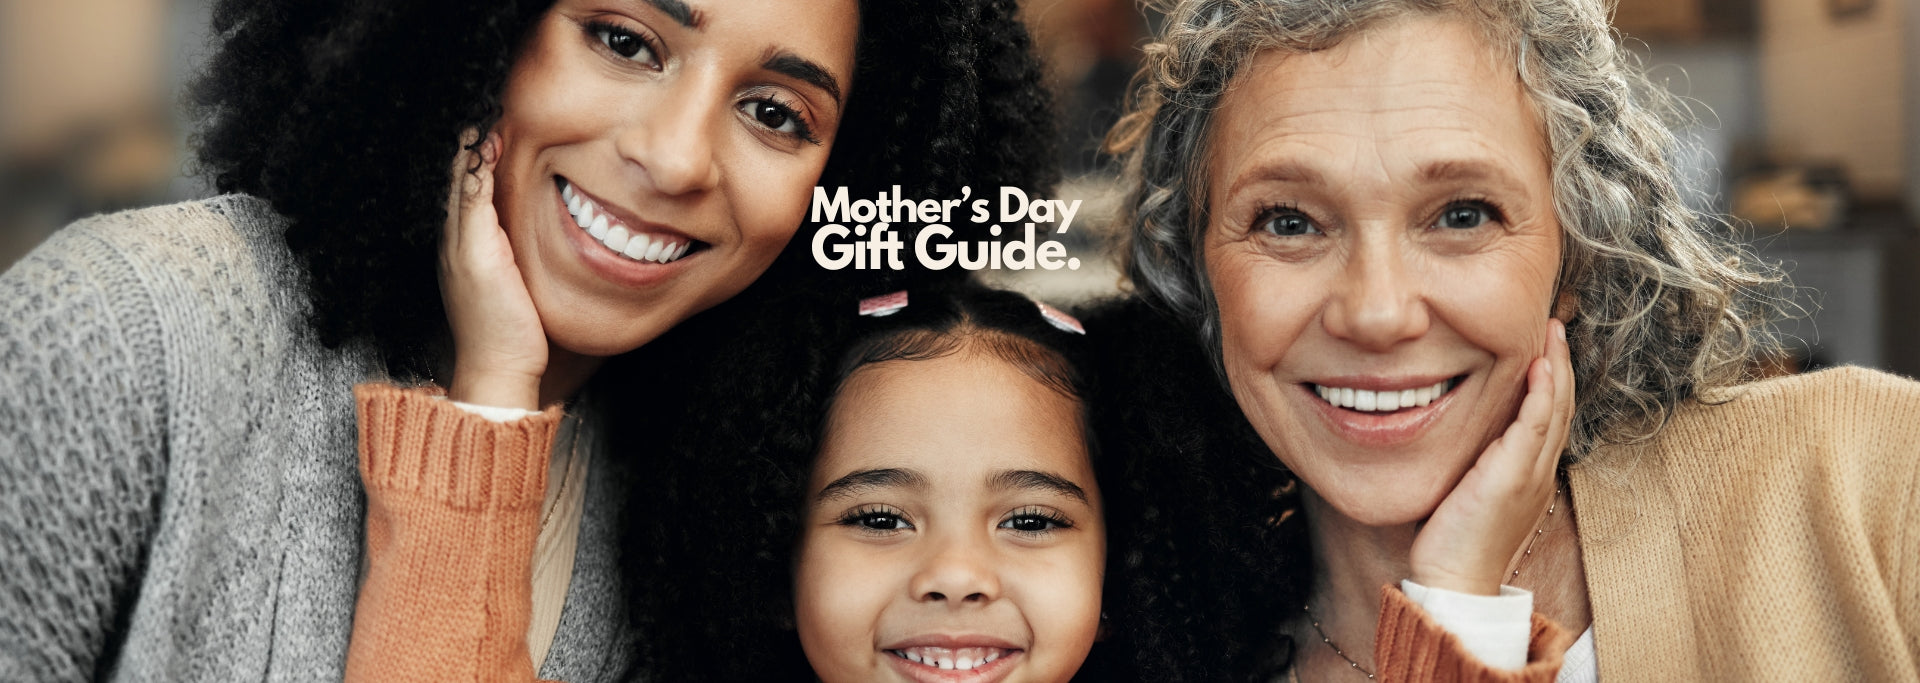 Our Top 5 Mother's Day Gifts Guide